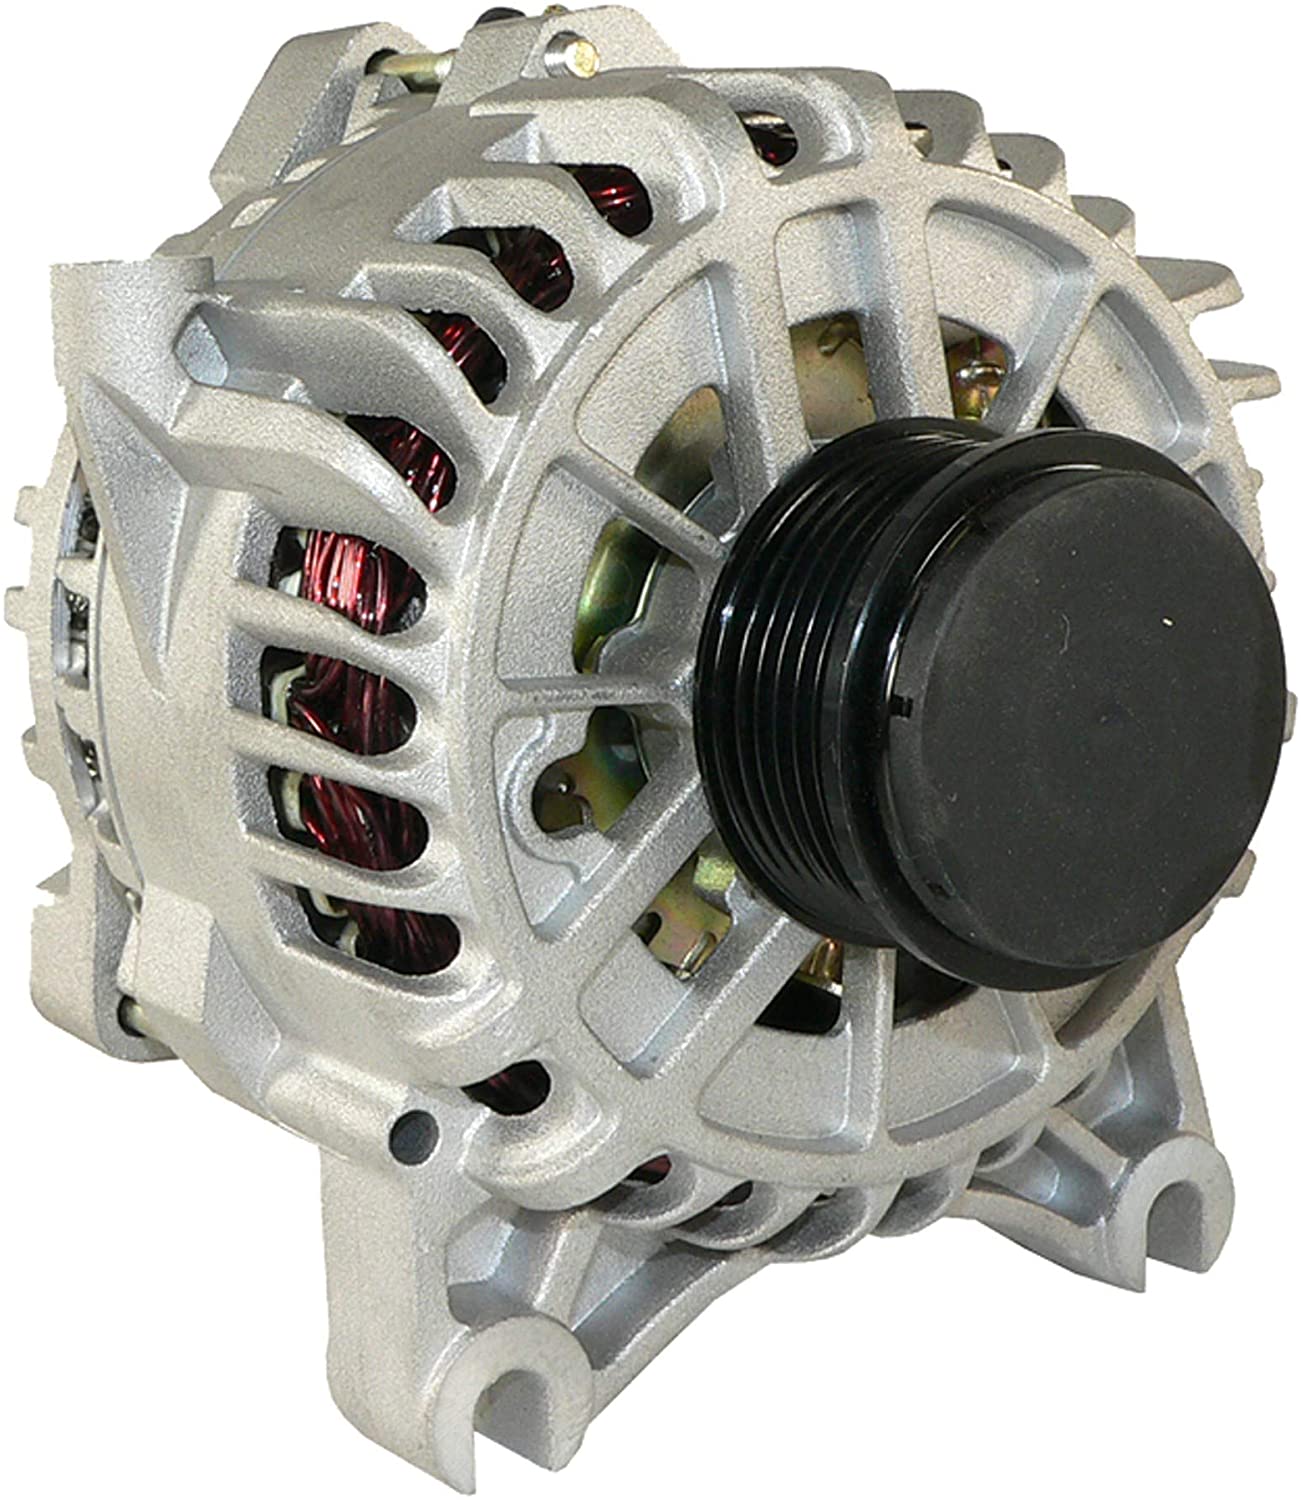 DB Electrical AFD0128 Alternator Compatible With/Replacement For Ford Expedition V8 4.6L 5.4L 2003 2004, Lincoln Navigator 2003 2004 135 Amp 3L74-10300-AA 3L74-10300-BA 3L74-10300-BB 3L74-10346-AA